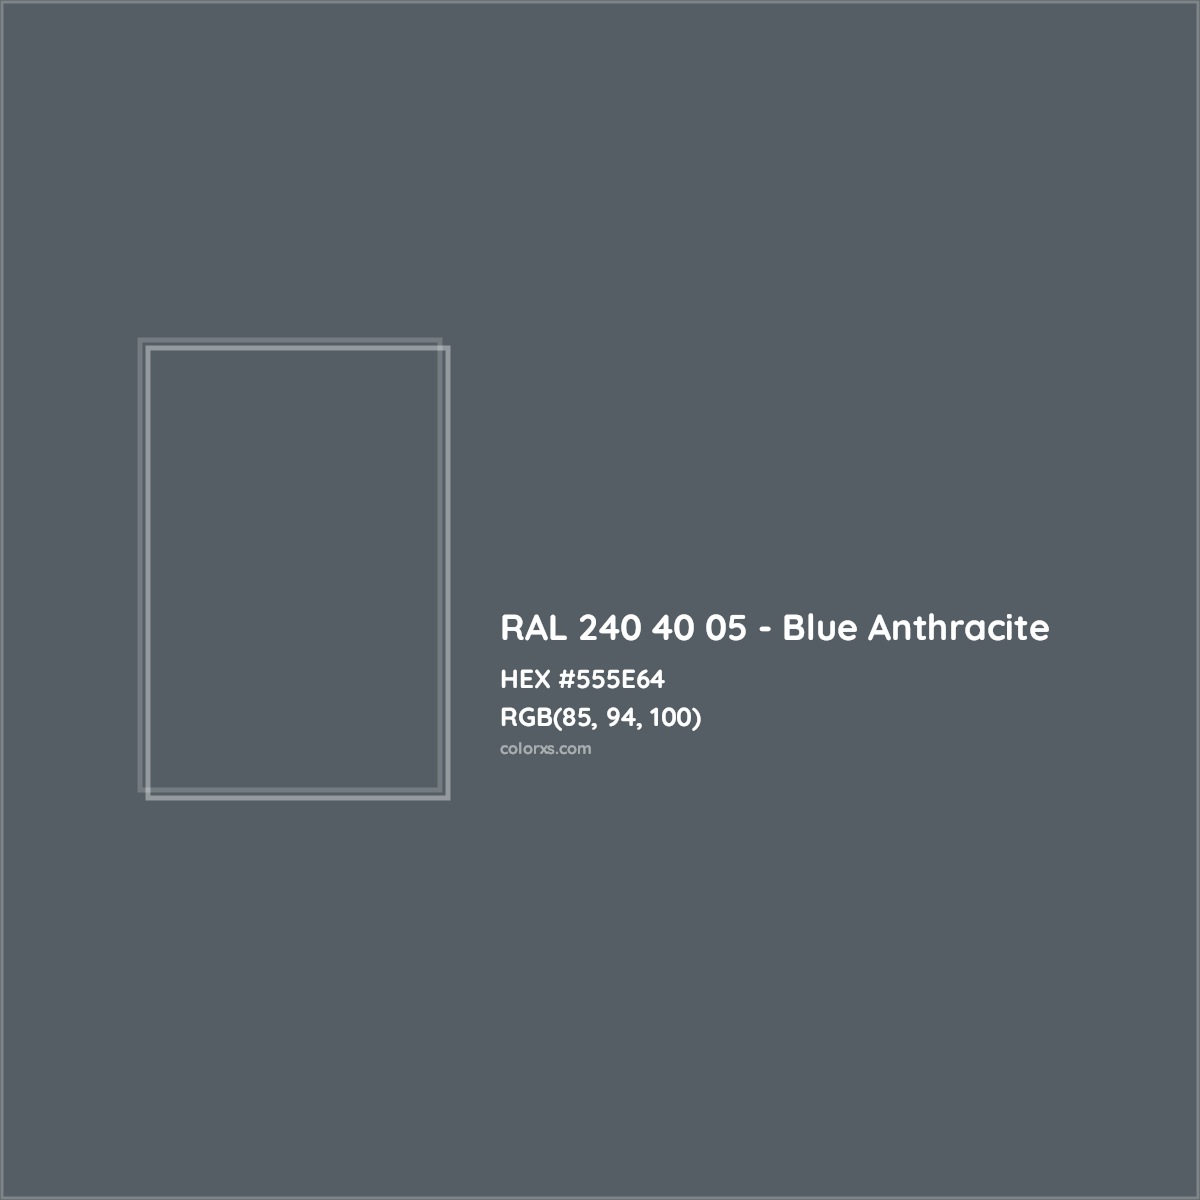 HEX #555E64 RAL 240 40 05 - Blue Anthracite CMS RAL Design - Color Code